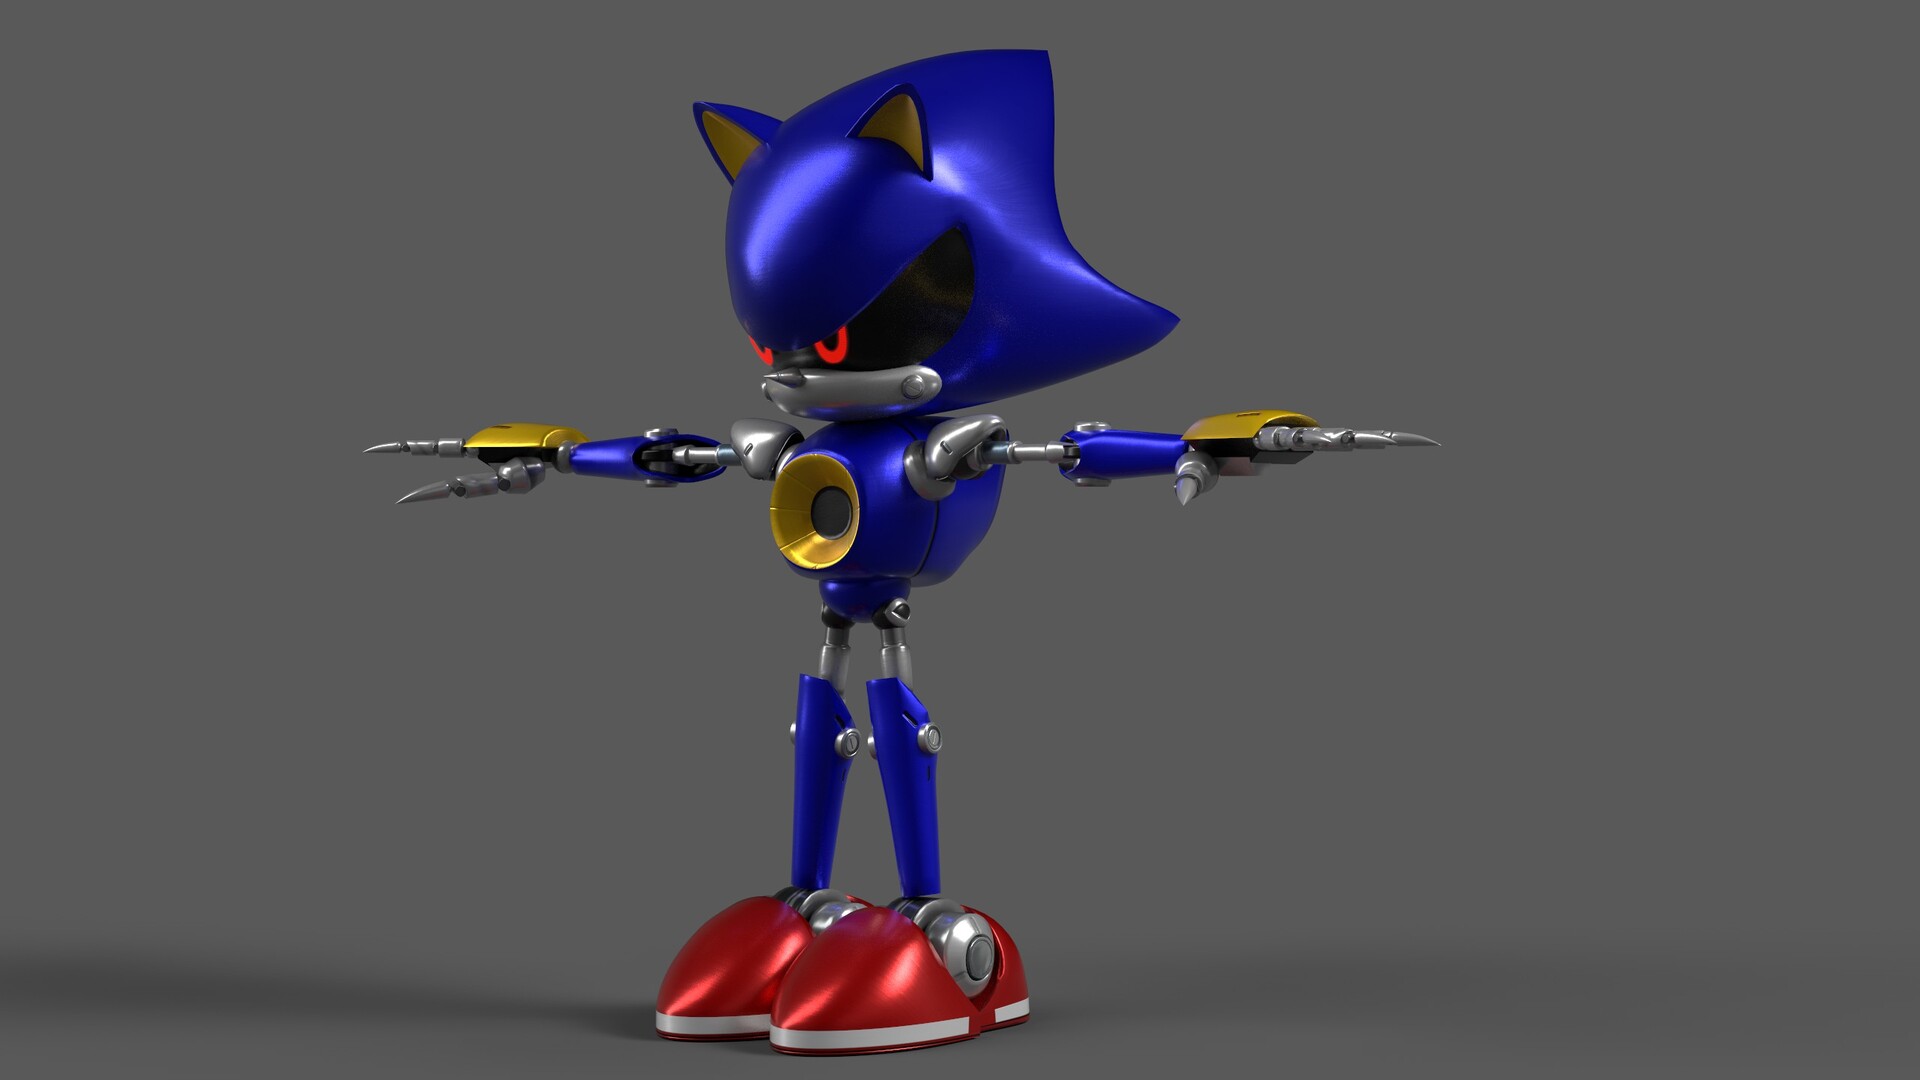 NEW* NEO METAL SONIC CHARACTER COMING In SONIC SPEED SIMULATOR